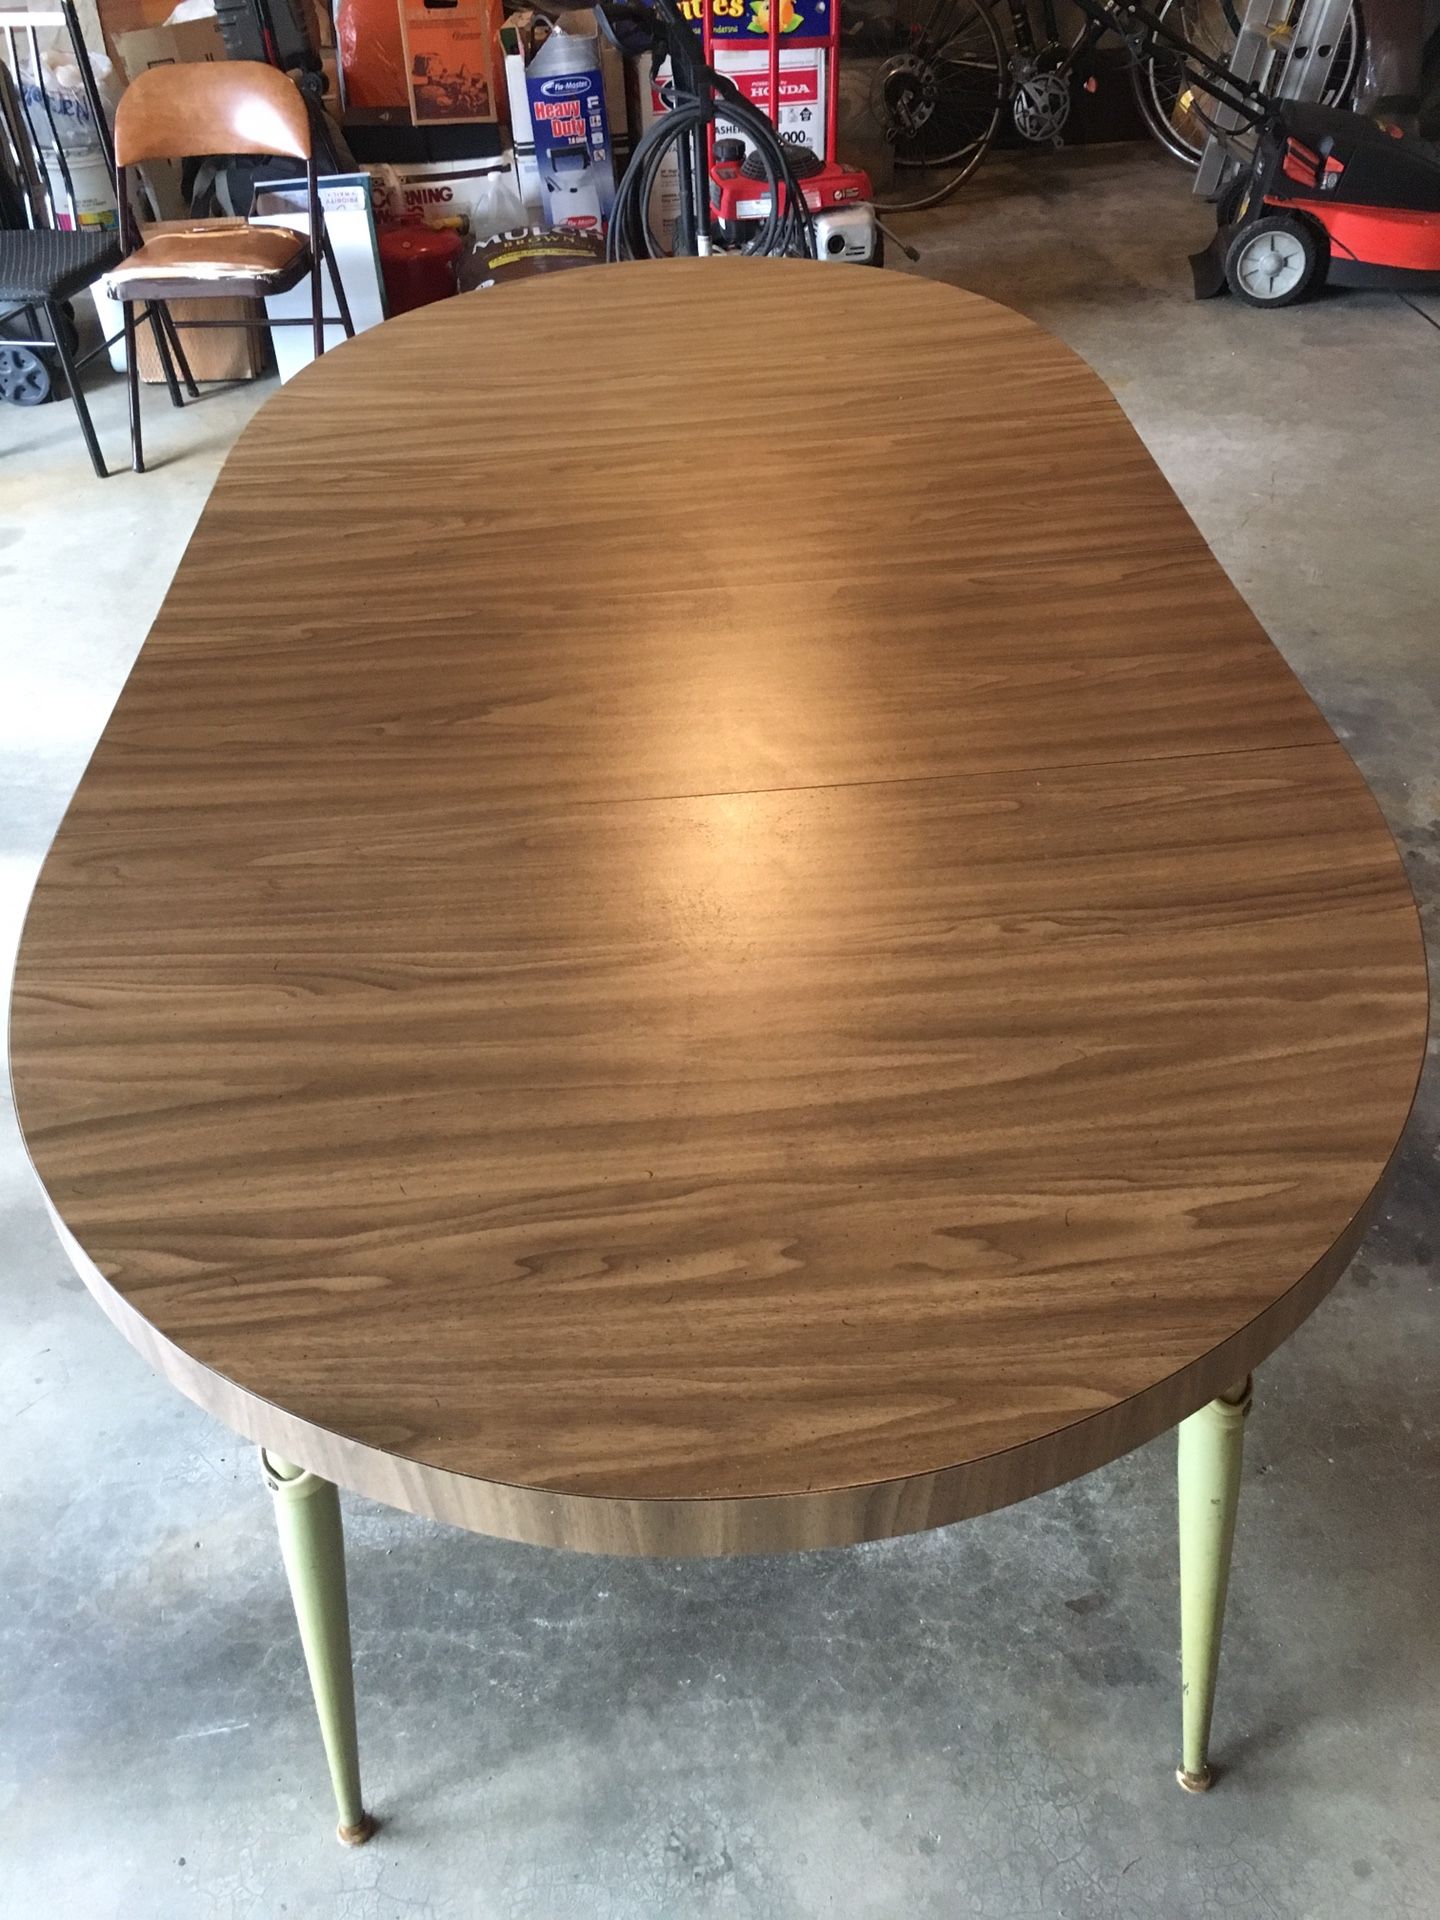 4-8 seater kitchen table. It has two leafs. 82” L x 41”W x 28.5”H